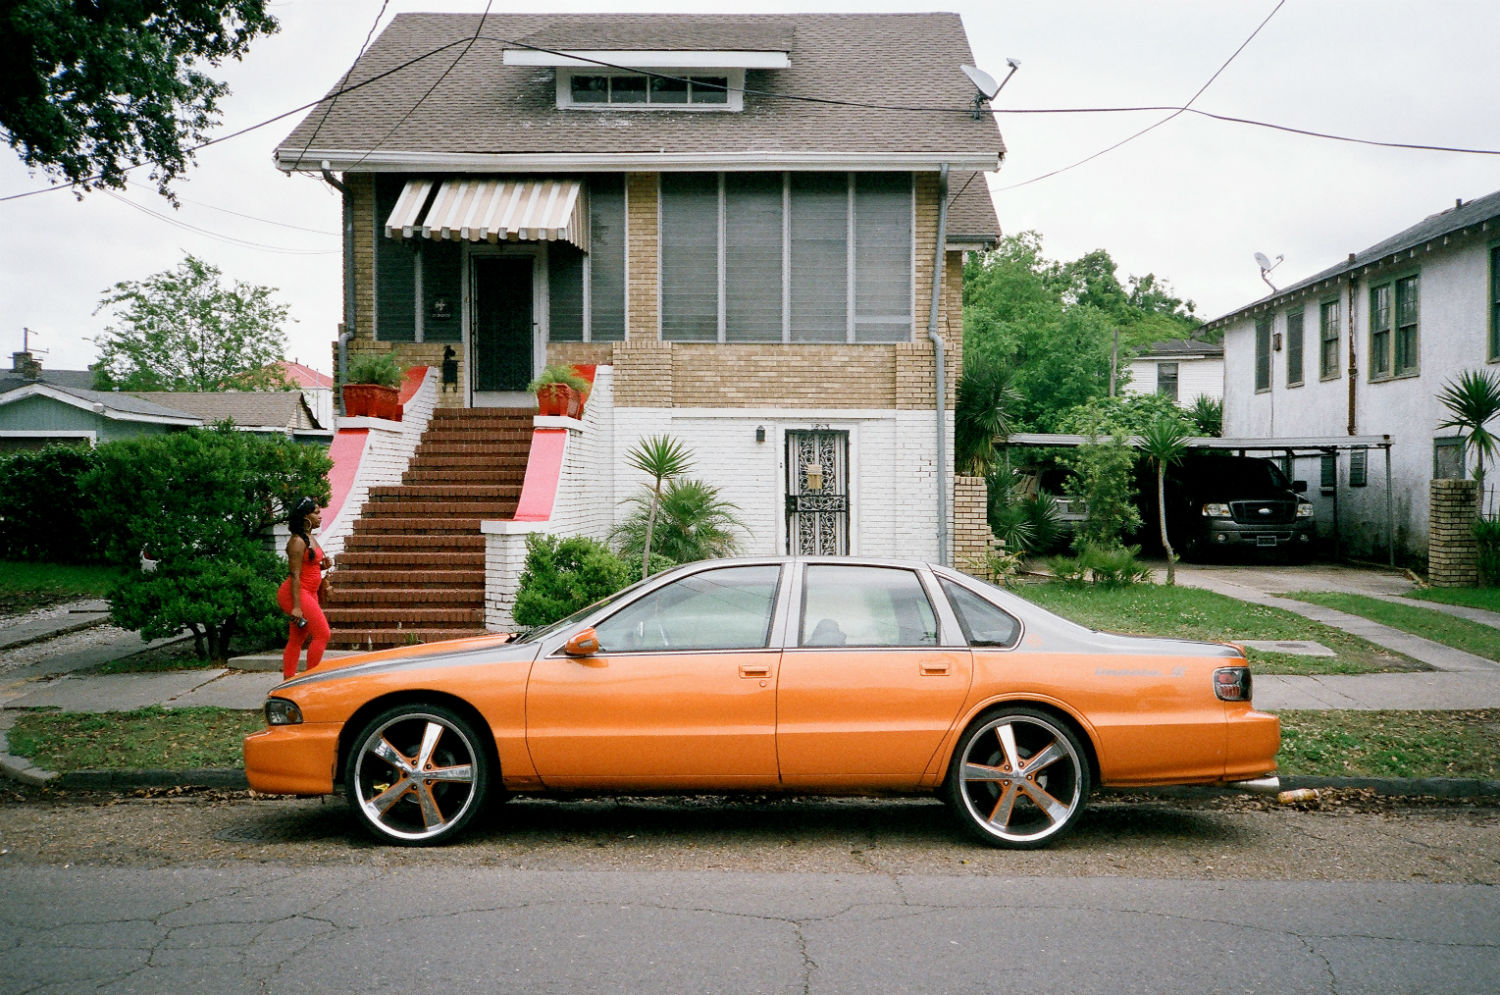 "I shot this photo right down the street from my house. New Orleans has a lot of sweet rides and well-dressed ladies."